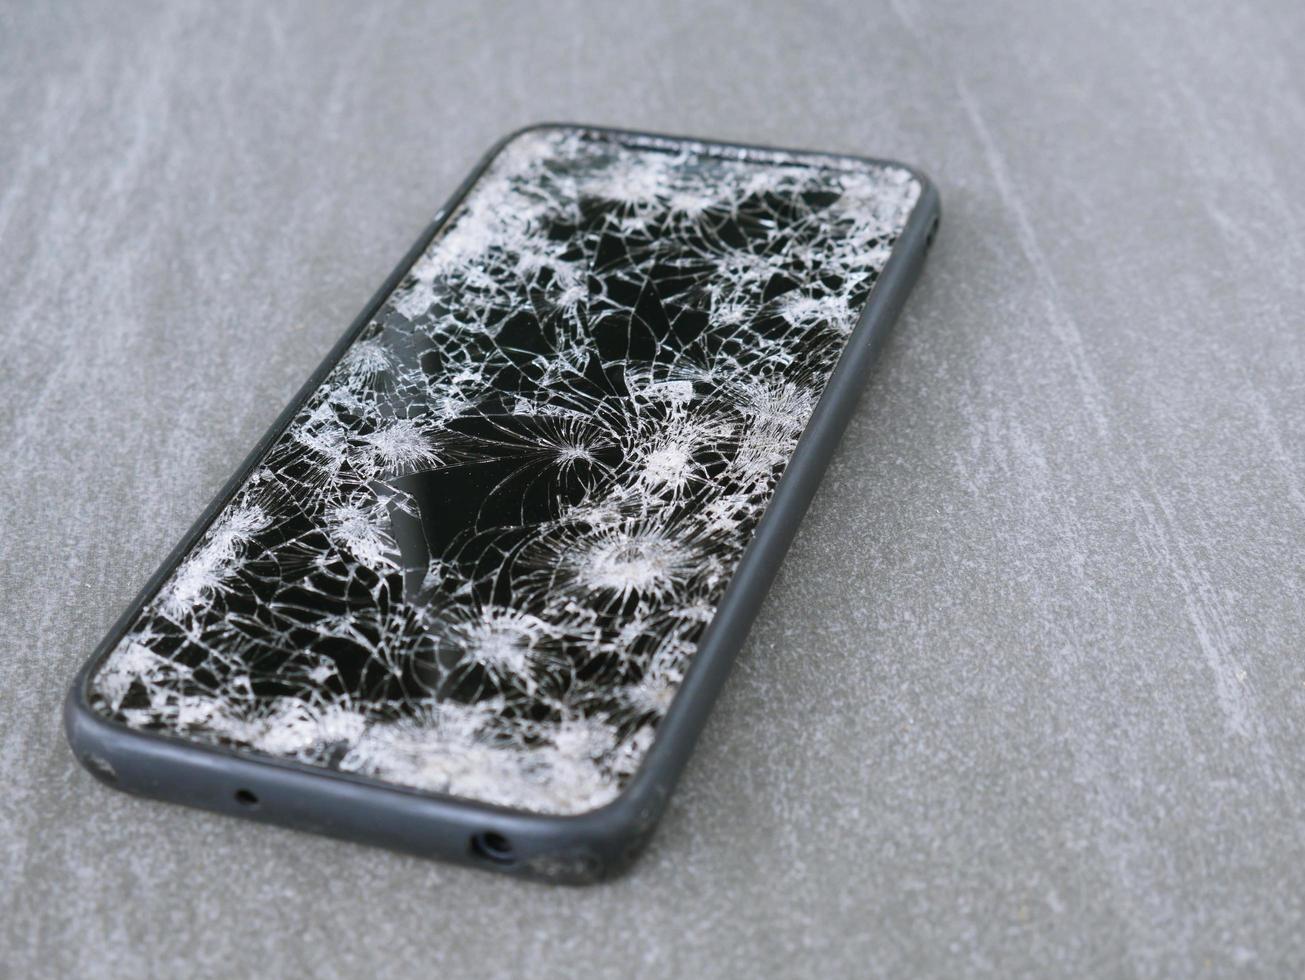 The smartphone hit the floor, it fell into a crack. photo